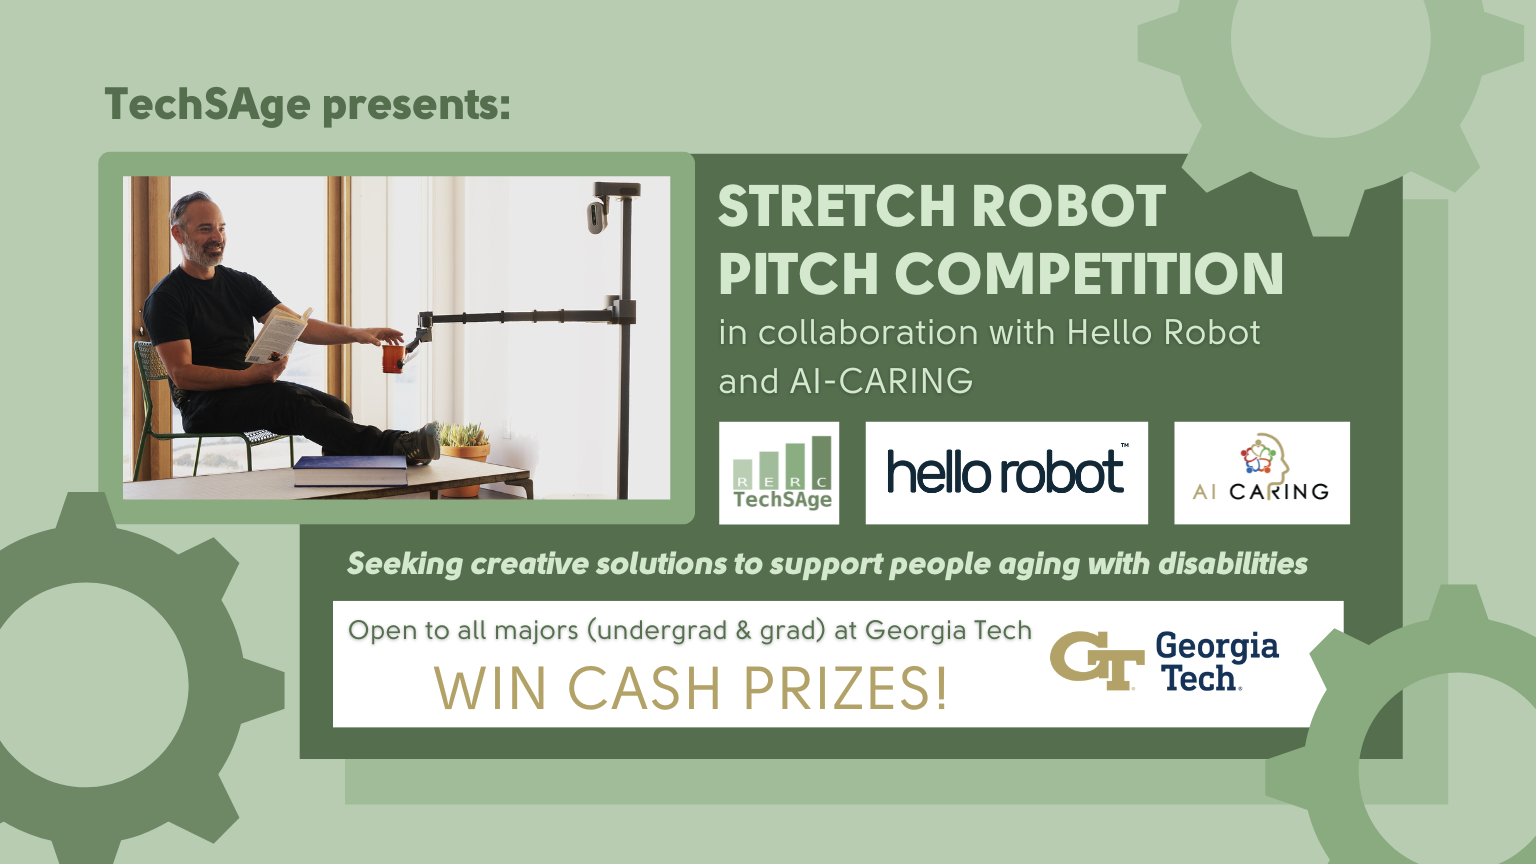 Stretch Robot Pitch Competition advertisement features competition details and an image that shows a robot passing a man a drink